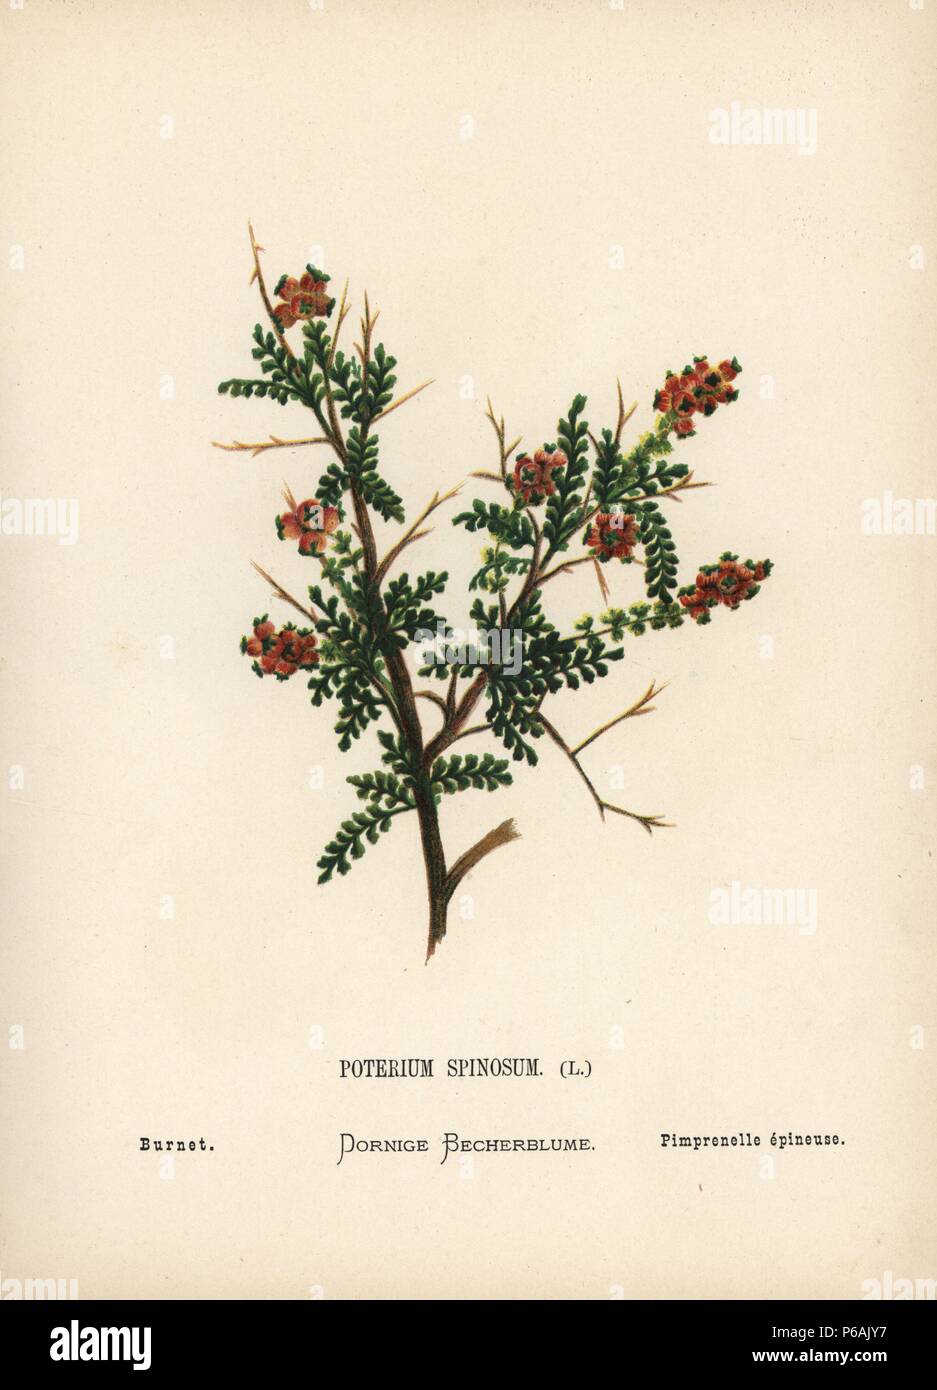 Thorny burnet, Sarcopoterium spinosum. Chromolithograph of a botanical illustration by Hannah Zeller from her own Wild Flowers of the Holy Land,' James Nisbet, London, 1876. Hannah Zeller (1838-1922) was a Swiss missionary who botanized near Nazareth for many years. Stock Photo